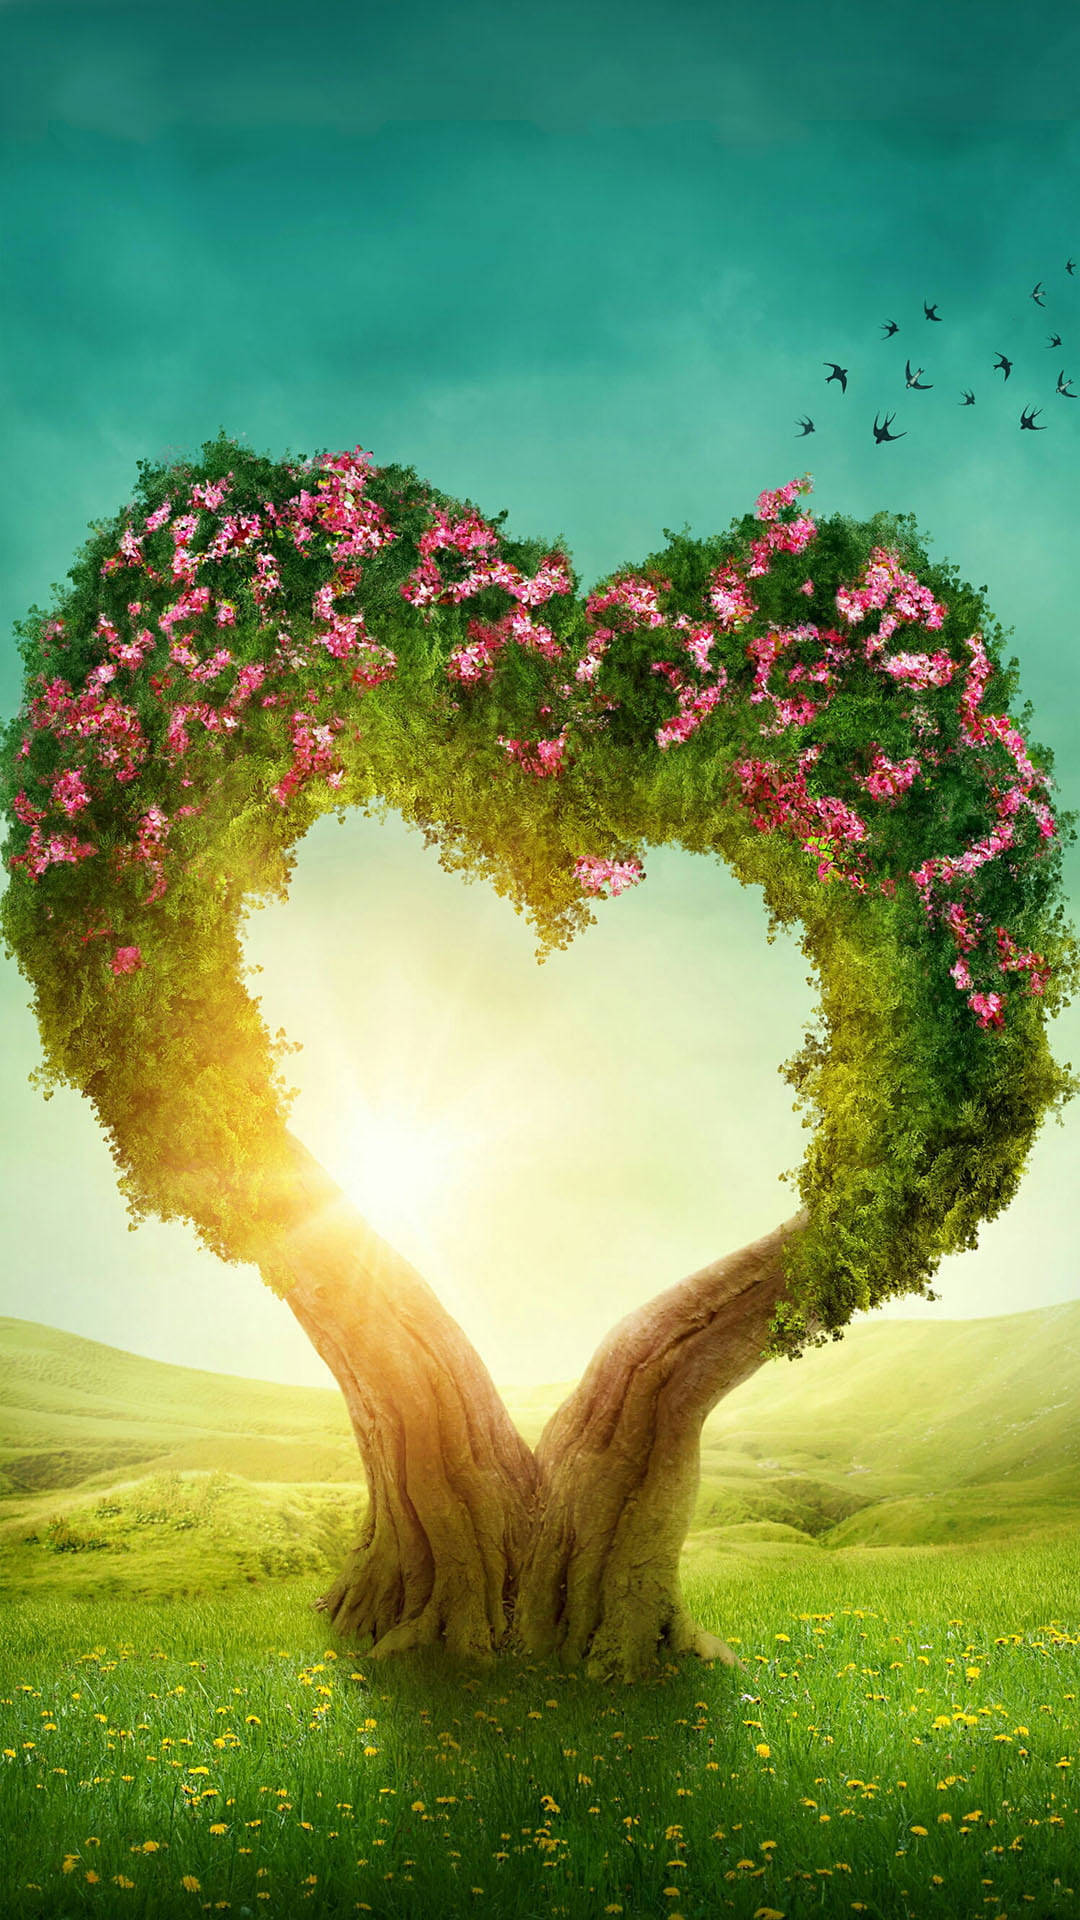 Surreal Love Nature Heart Background